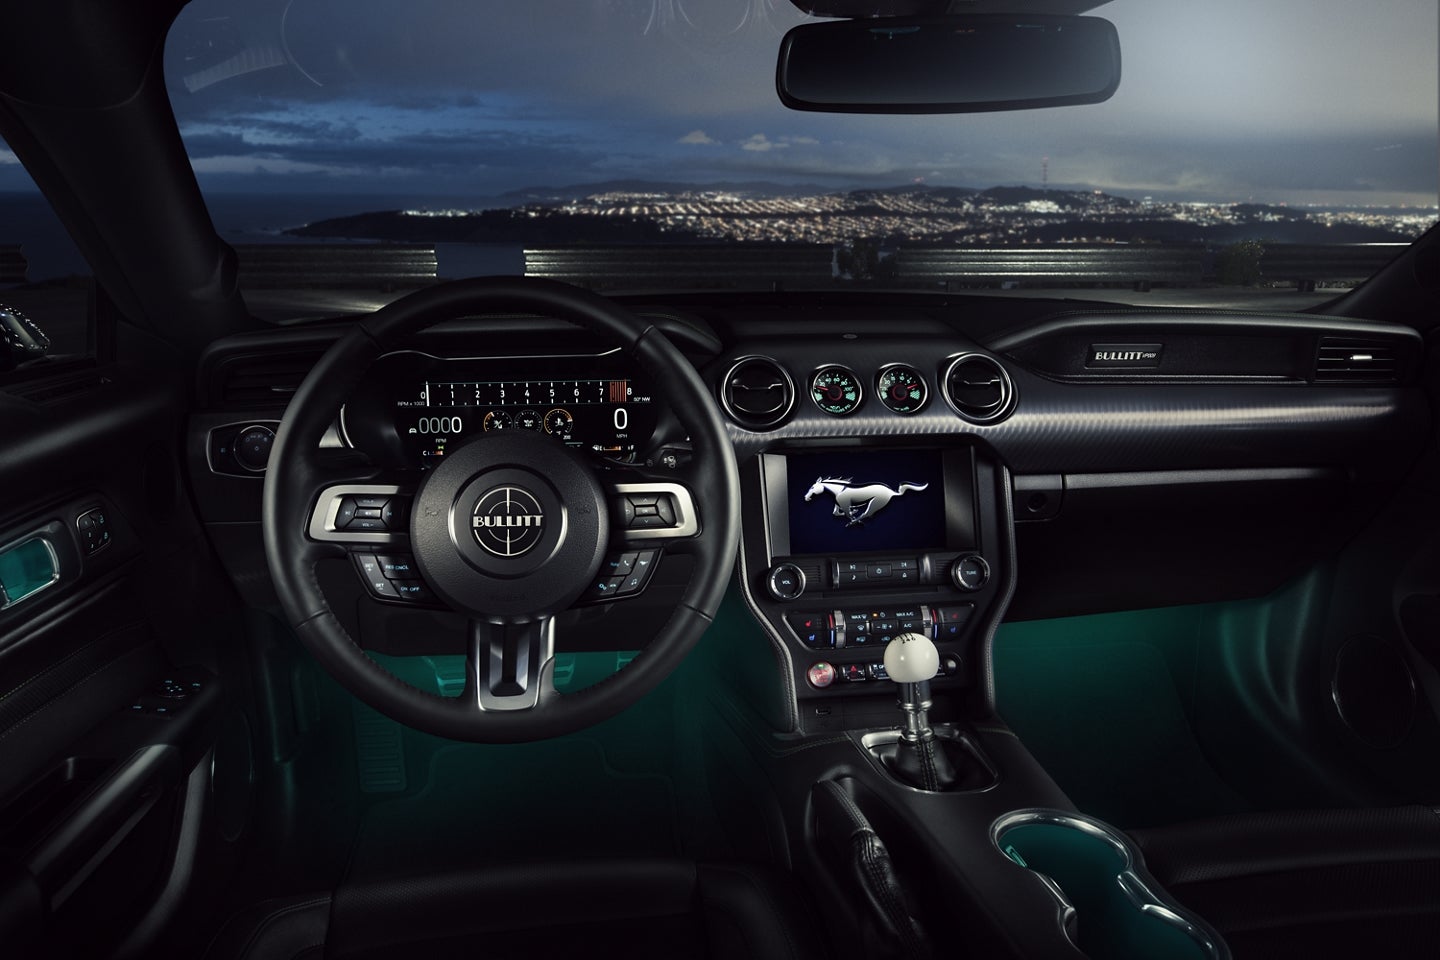 Tech Features in the 2020 Mustang